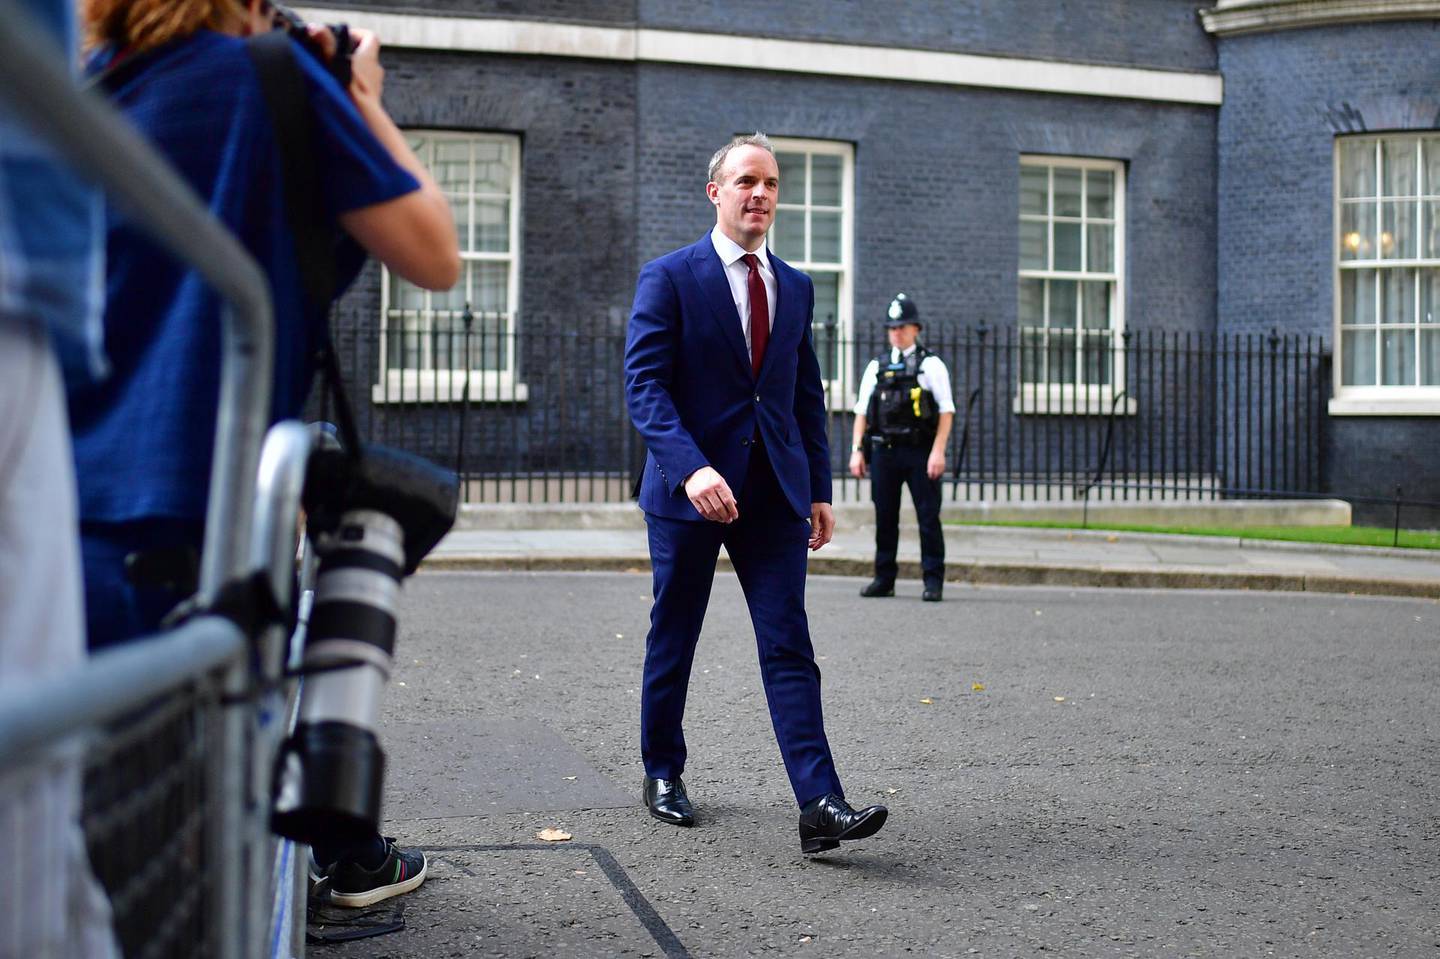 LONDON, ENGLAND - JULY 24: Newly appointed Secretary of State for Foreign and Commonwealth Affairs, Dominic Raab leaves Downing Street on July 24, 2019 in London, England. Boris Johnson took the office of Prime Minister of the United Kingdom of Great Britain and Northern Ireland this afternoon and immediately began appointing new Cabinet Ministers. Former Foreign secretary and leadership rival Jeremy Hunt returns to the back benches, along with Liam Fox, Jeremy Wright, Penny Mordaunt and Karen Bradley. (Photo by Leon Neal/Getty Images)